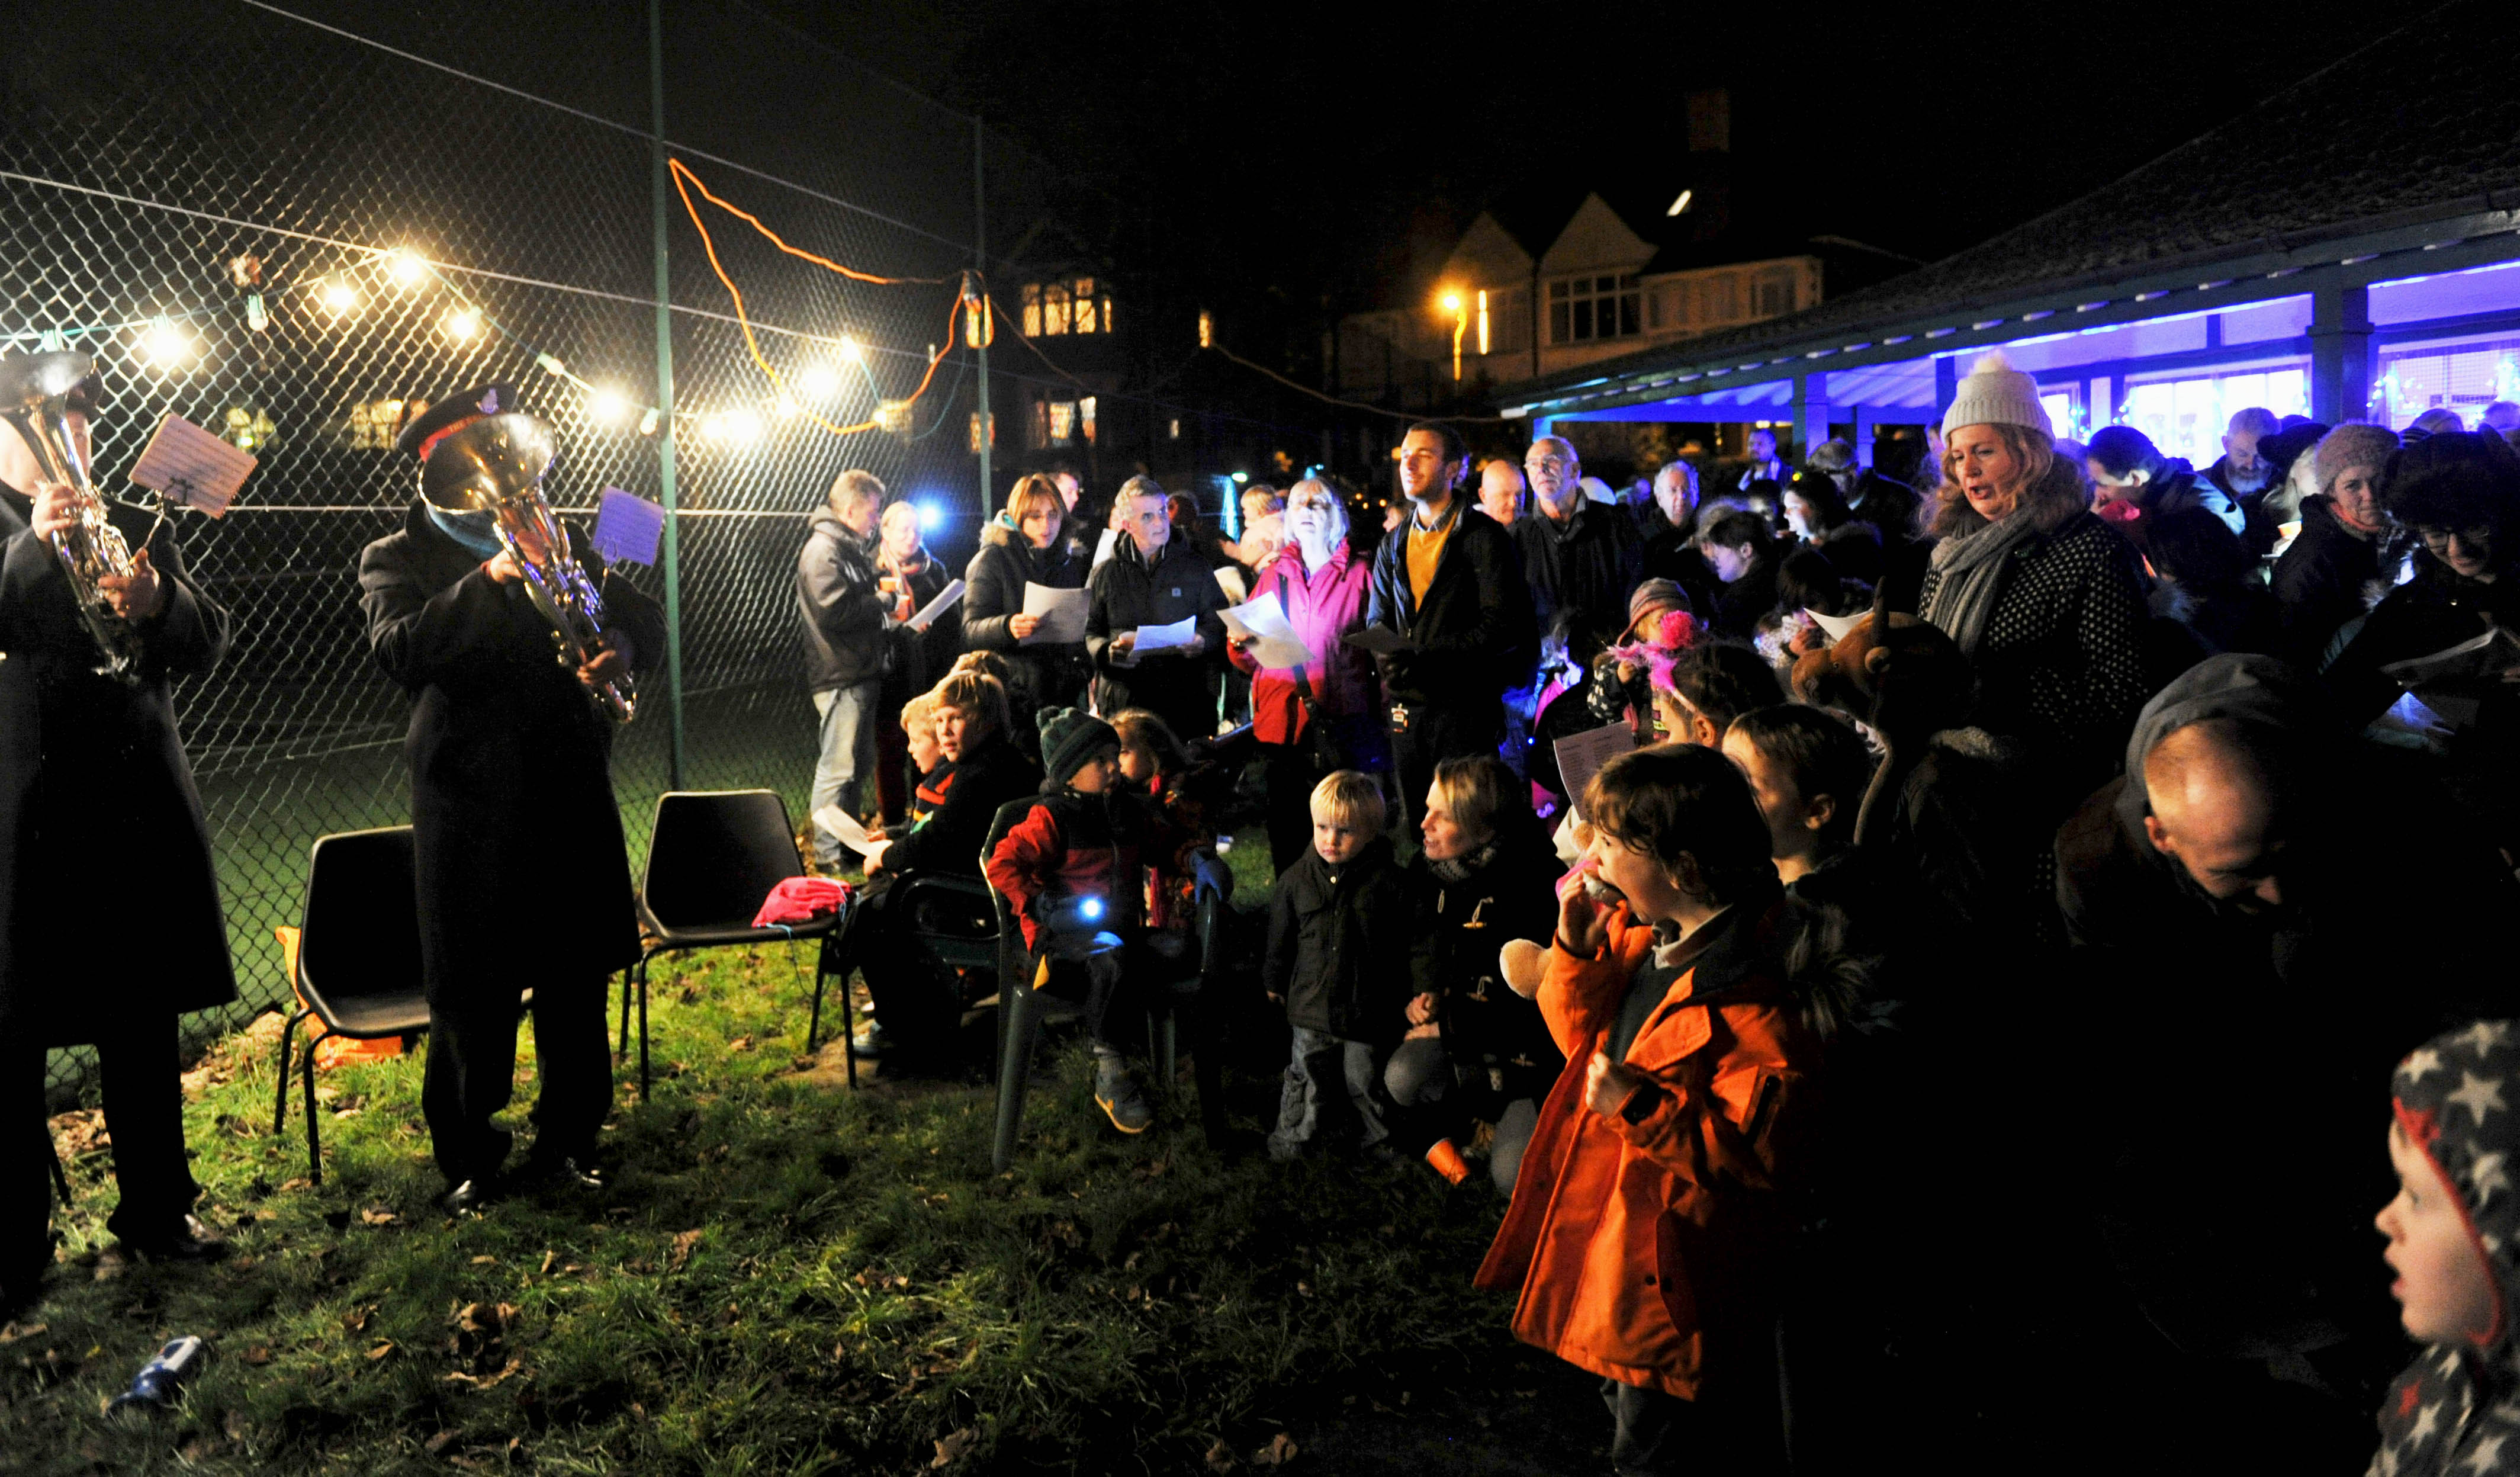 Hundreds turned out to enjoy the Friends of Queens Park 'Carols in the Park' event this year sponsored by Butler's Wine Cellar and music supplied by the Salvation Army with mince pies and mulled wine served up in the tennis club Photograph taken by Simon Dack